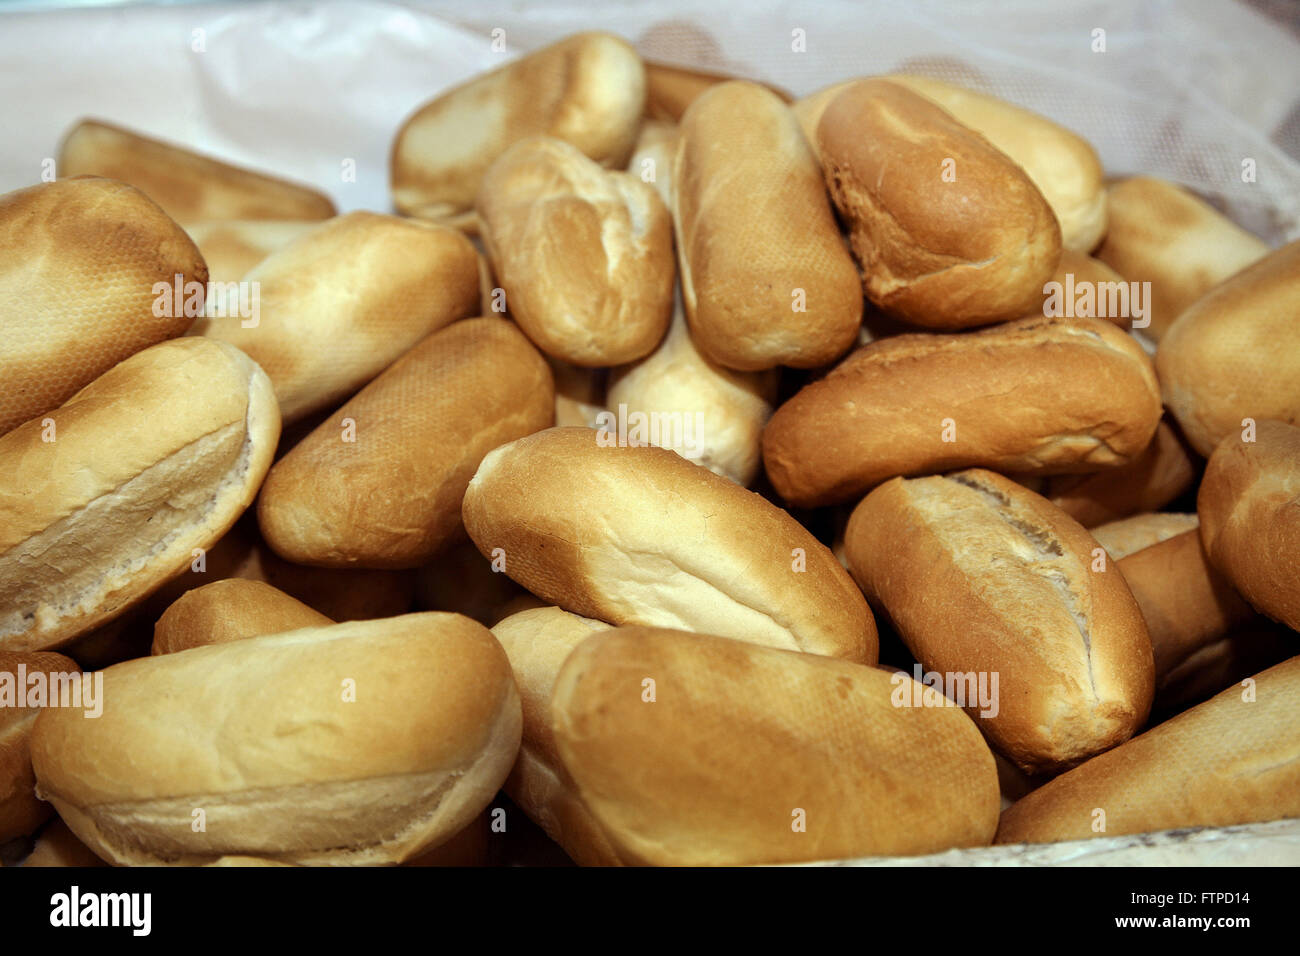 French bread sale at supermarket Stock Photo